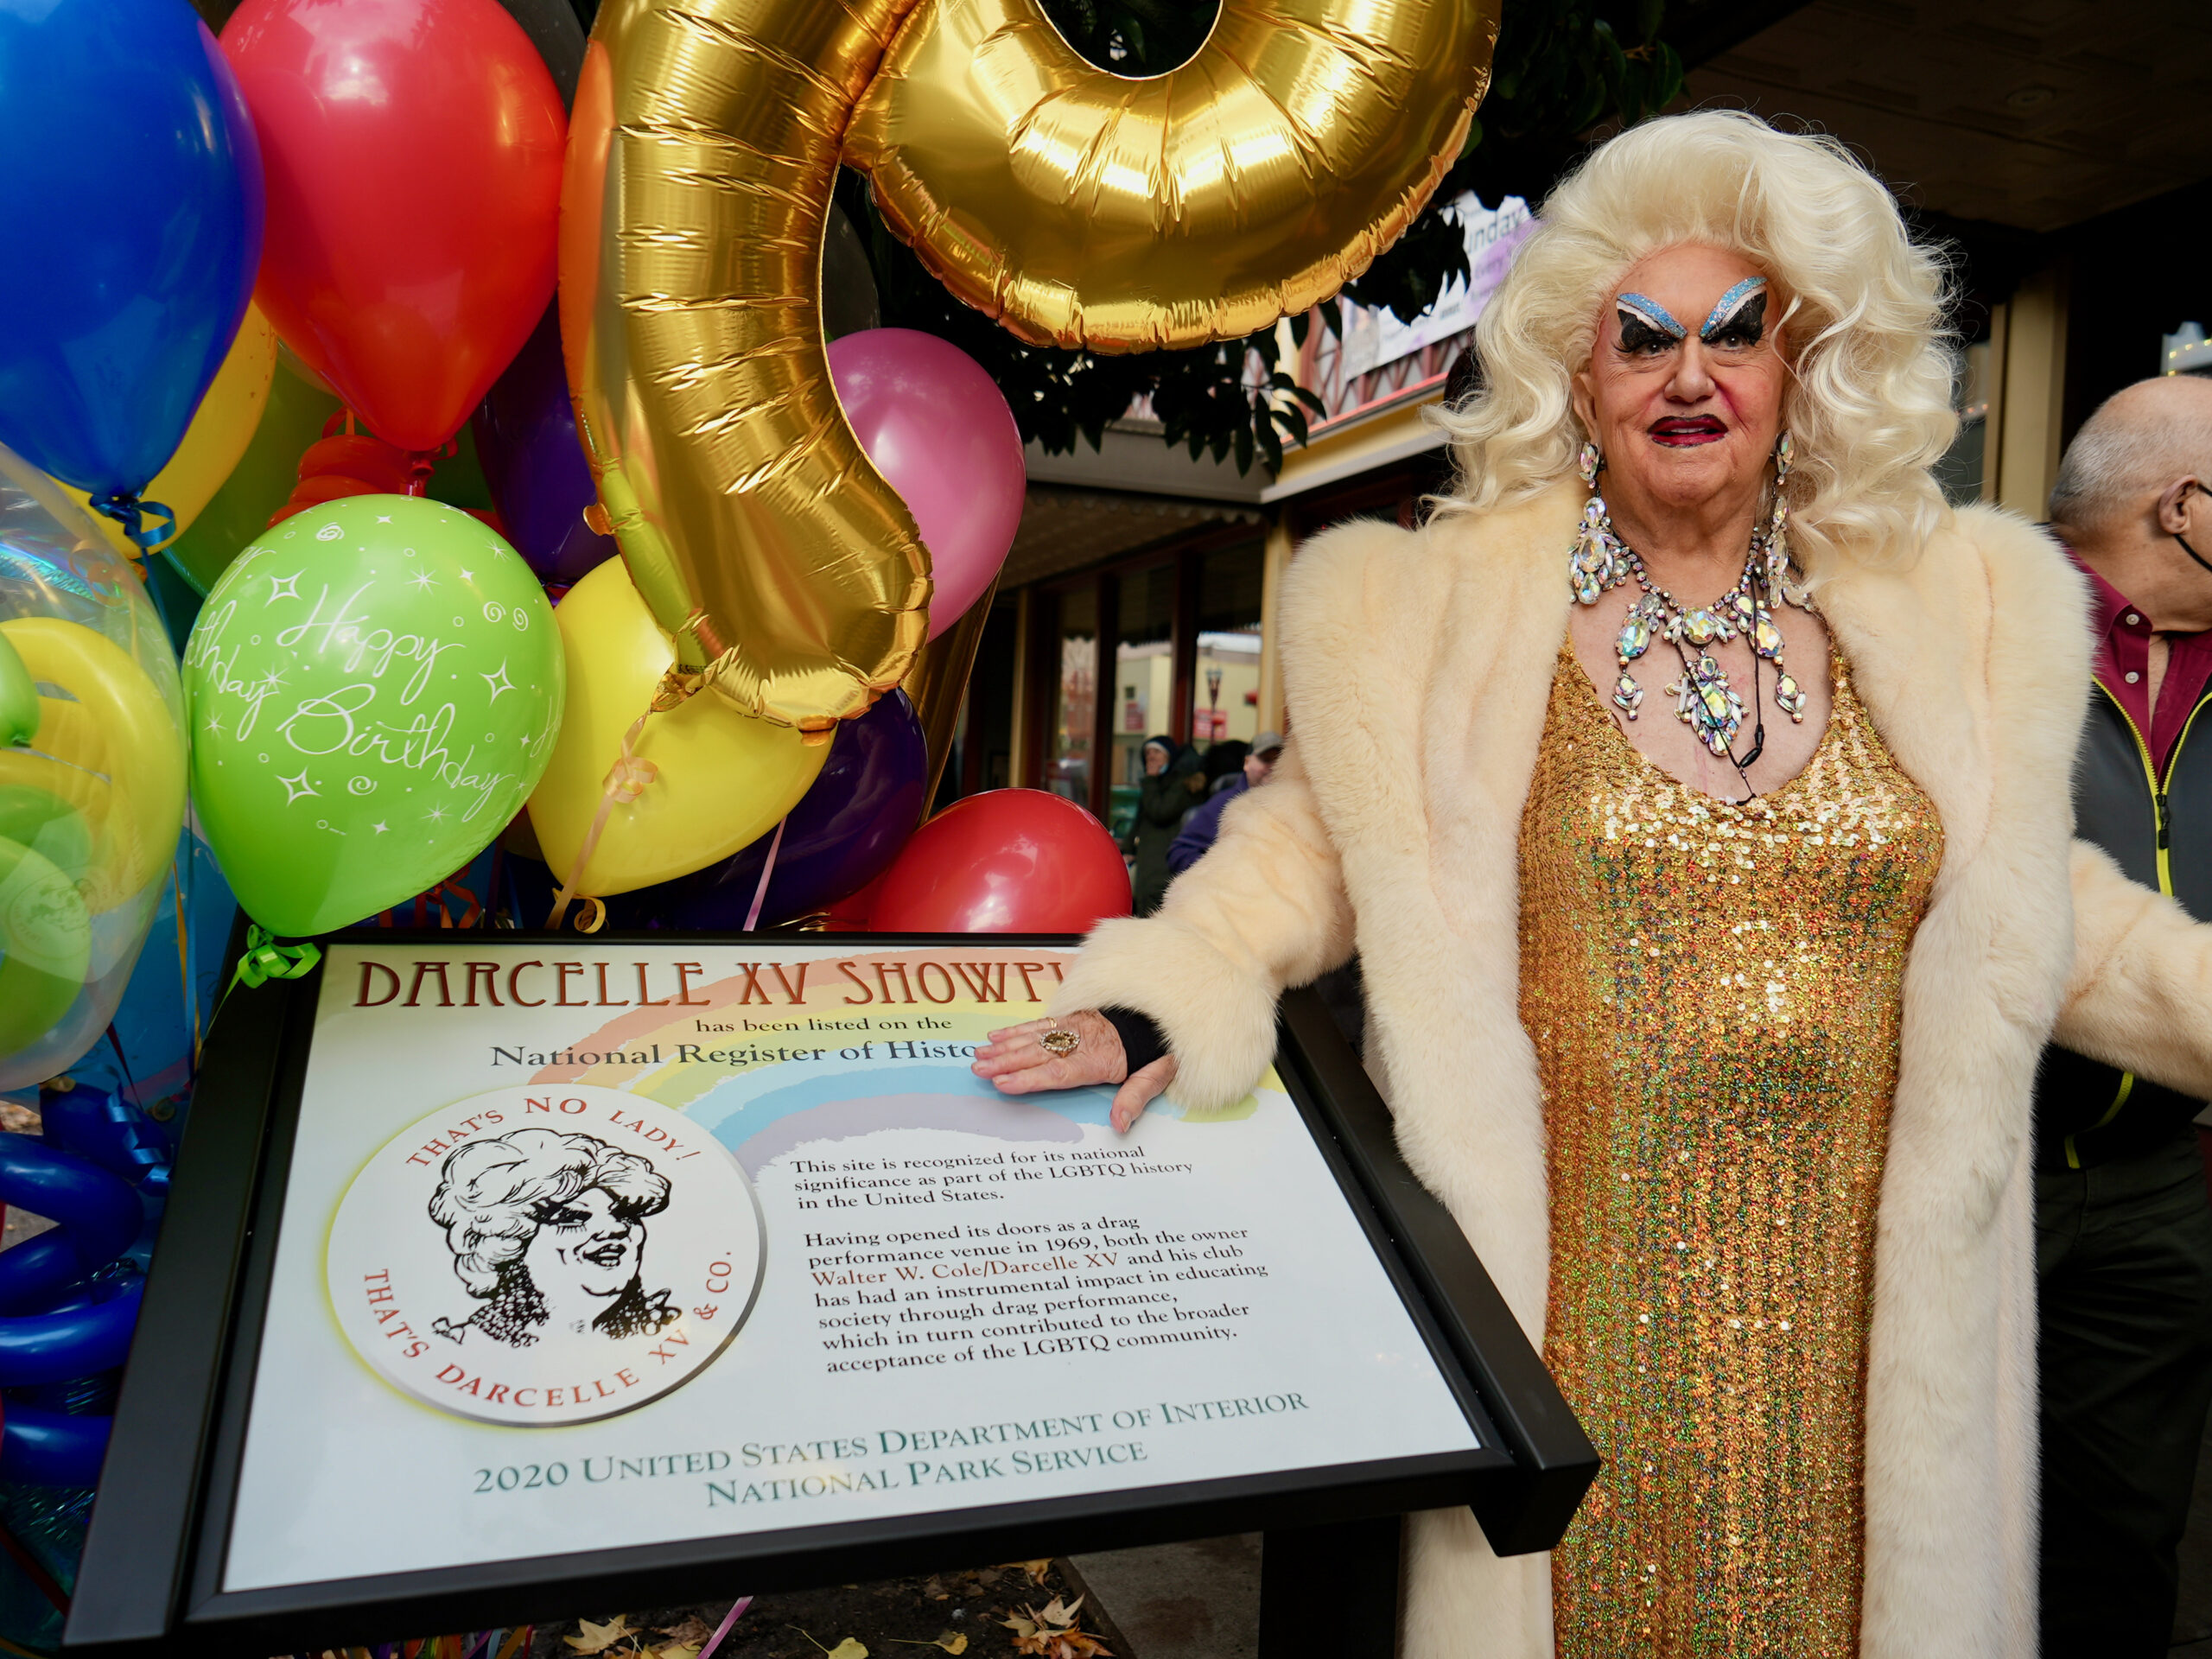 The world’s oldest drag queen, Darcelle XV  died at the age of 92